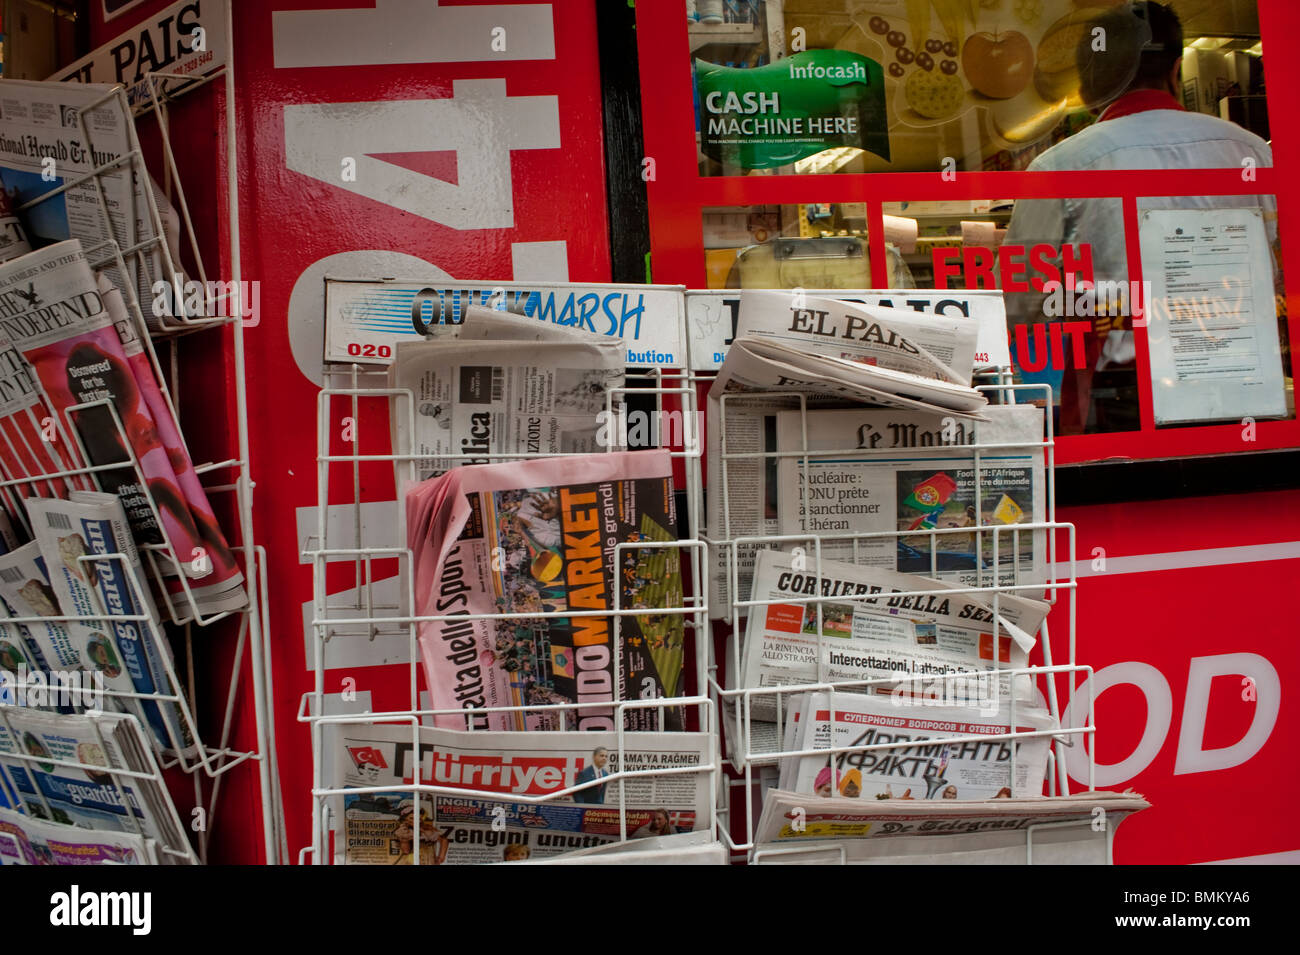 London, UK, Chinatown, Newsagent, English Newspapers on Display outside Shop Front, Newspapers on Sale on Street Stock Photo